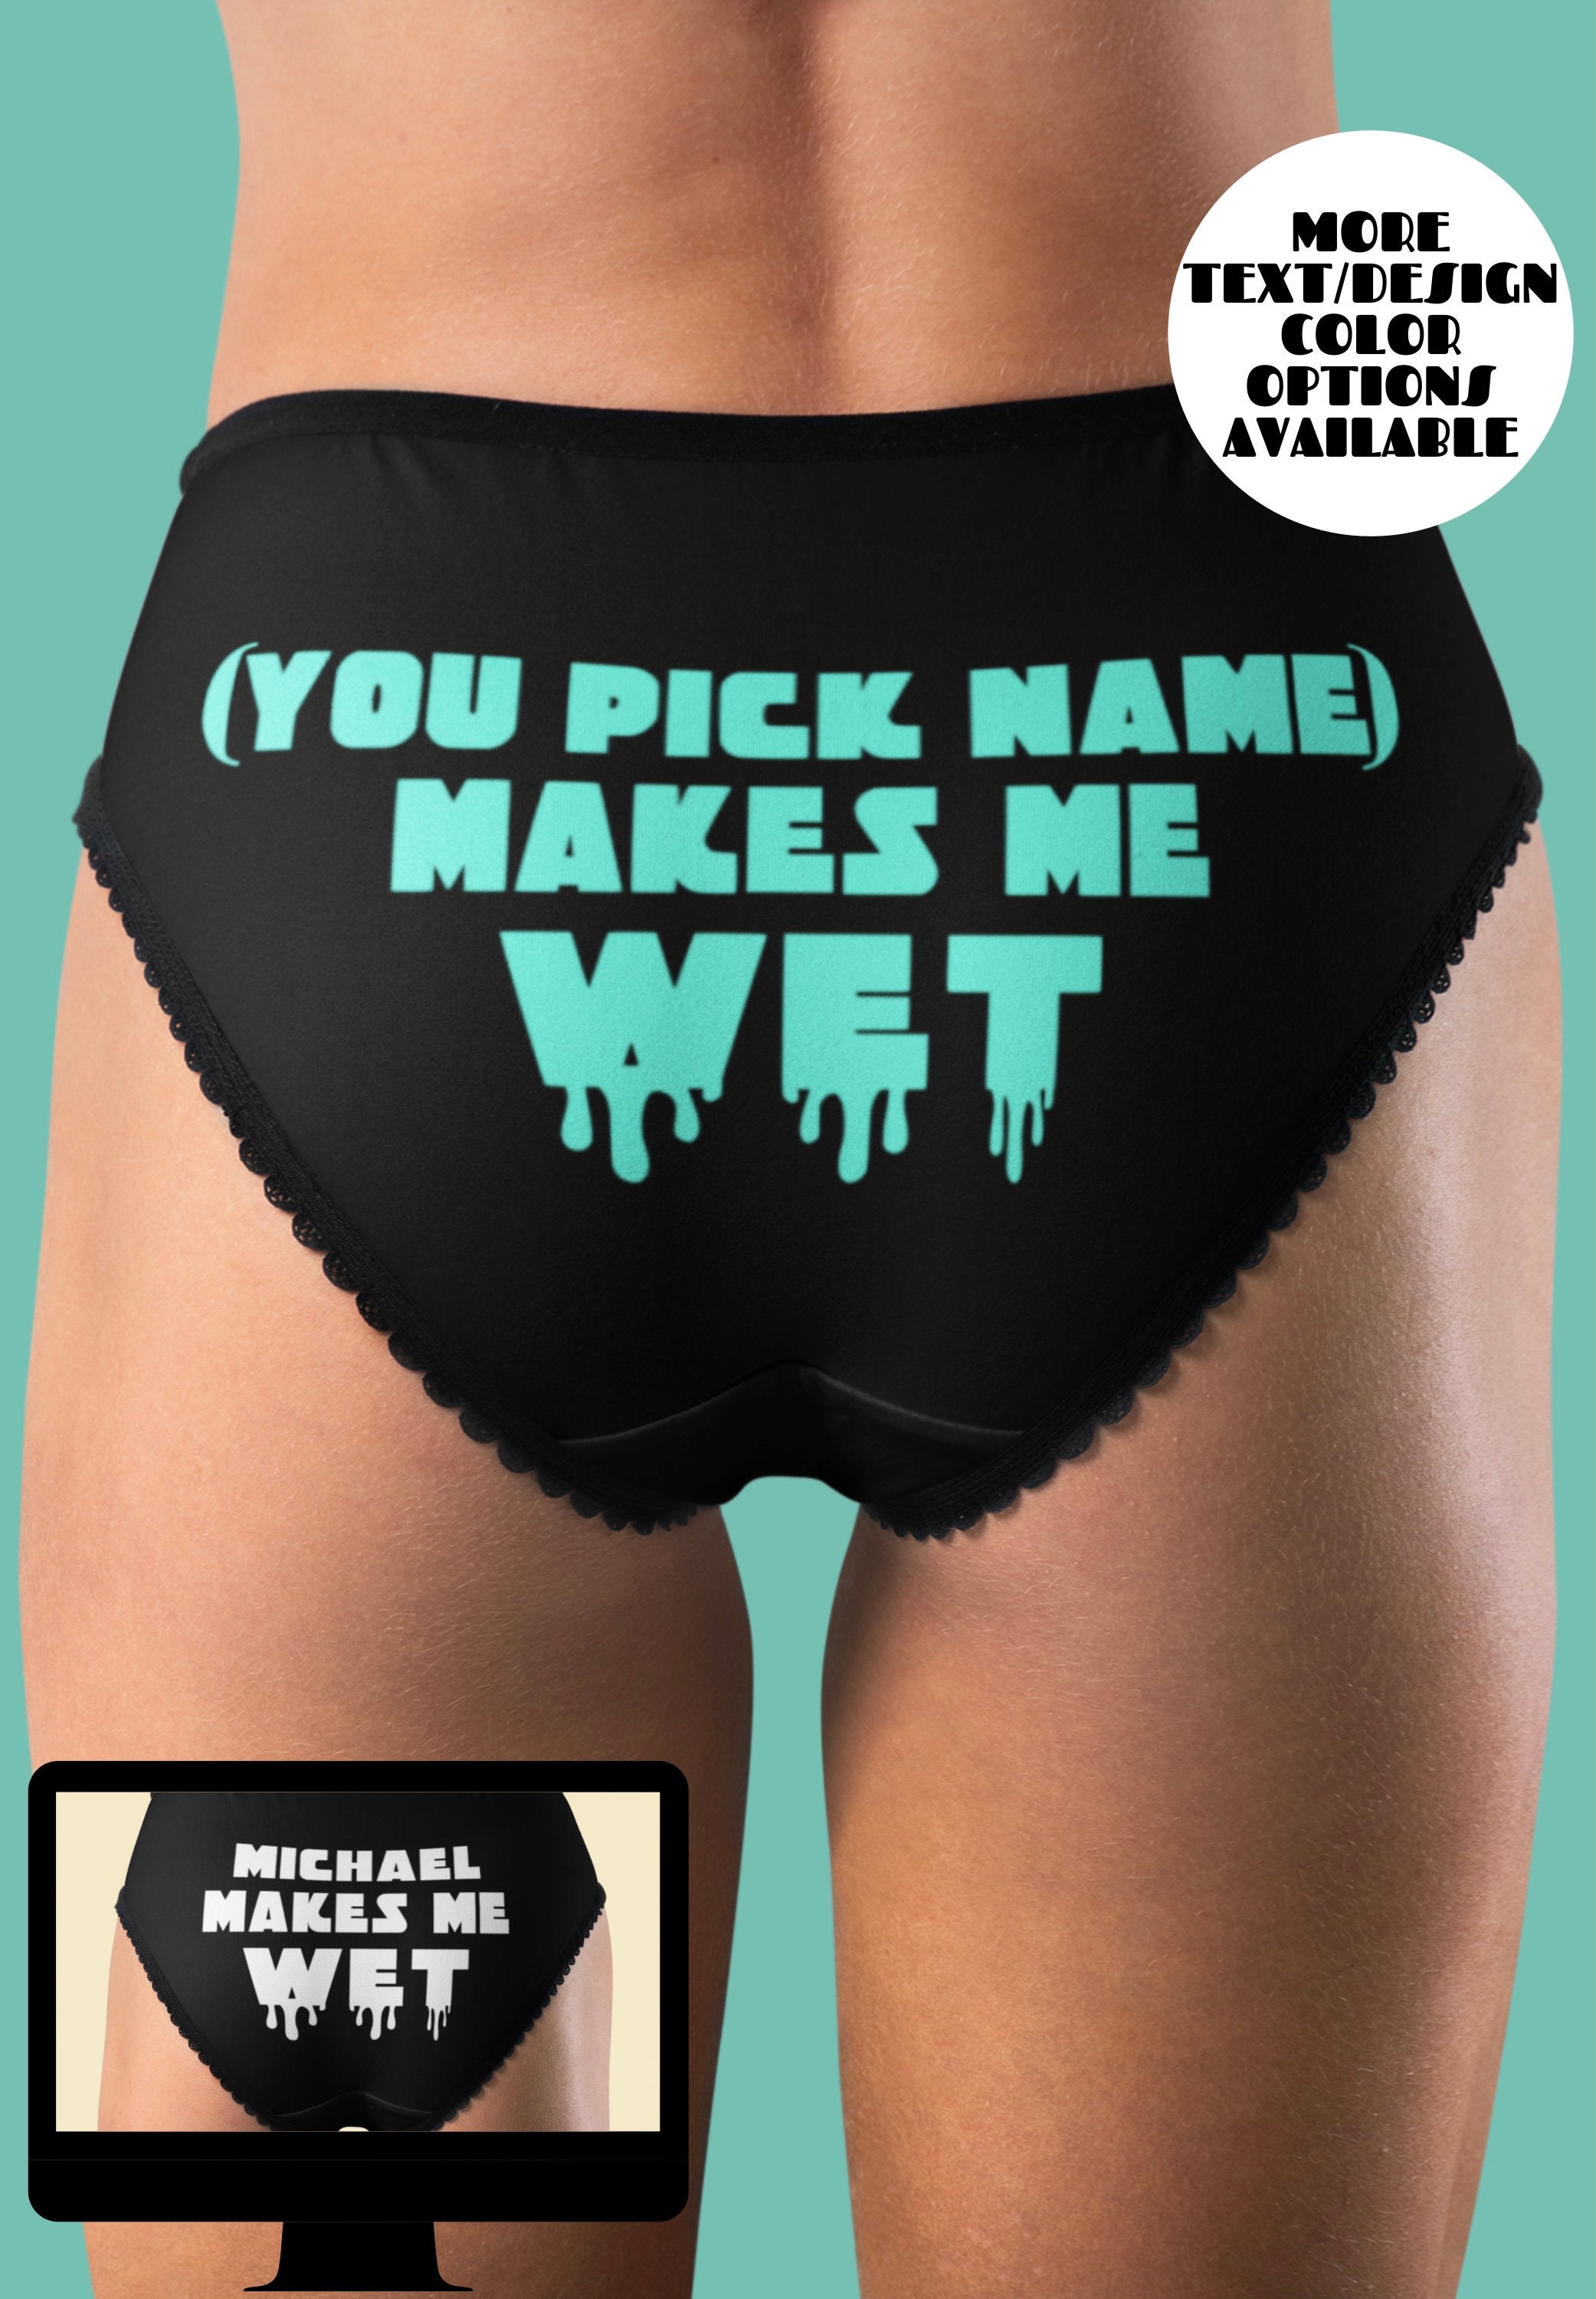 WET SLUT Personalized Name Phrase Cut Out Black Lace Sexy Thong Panty  Underwear